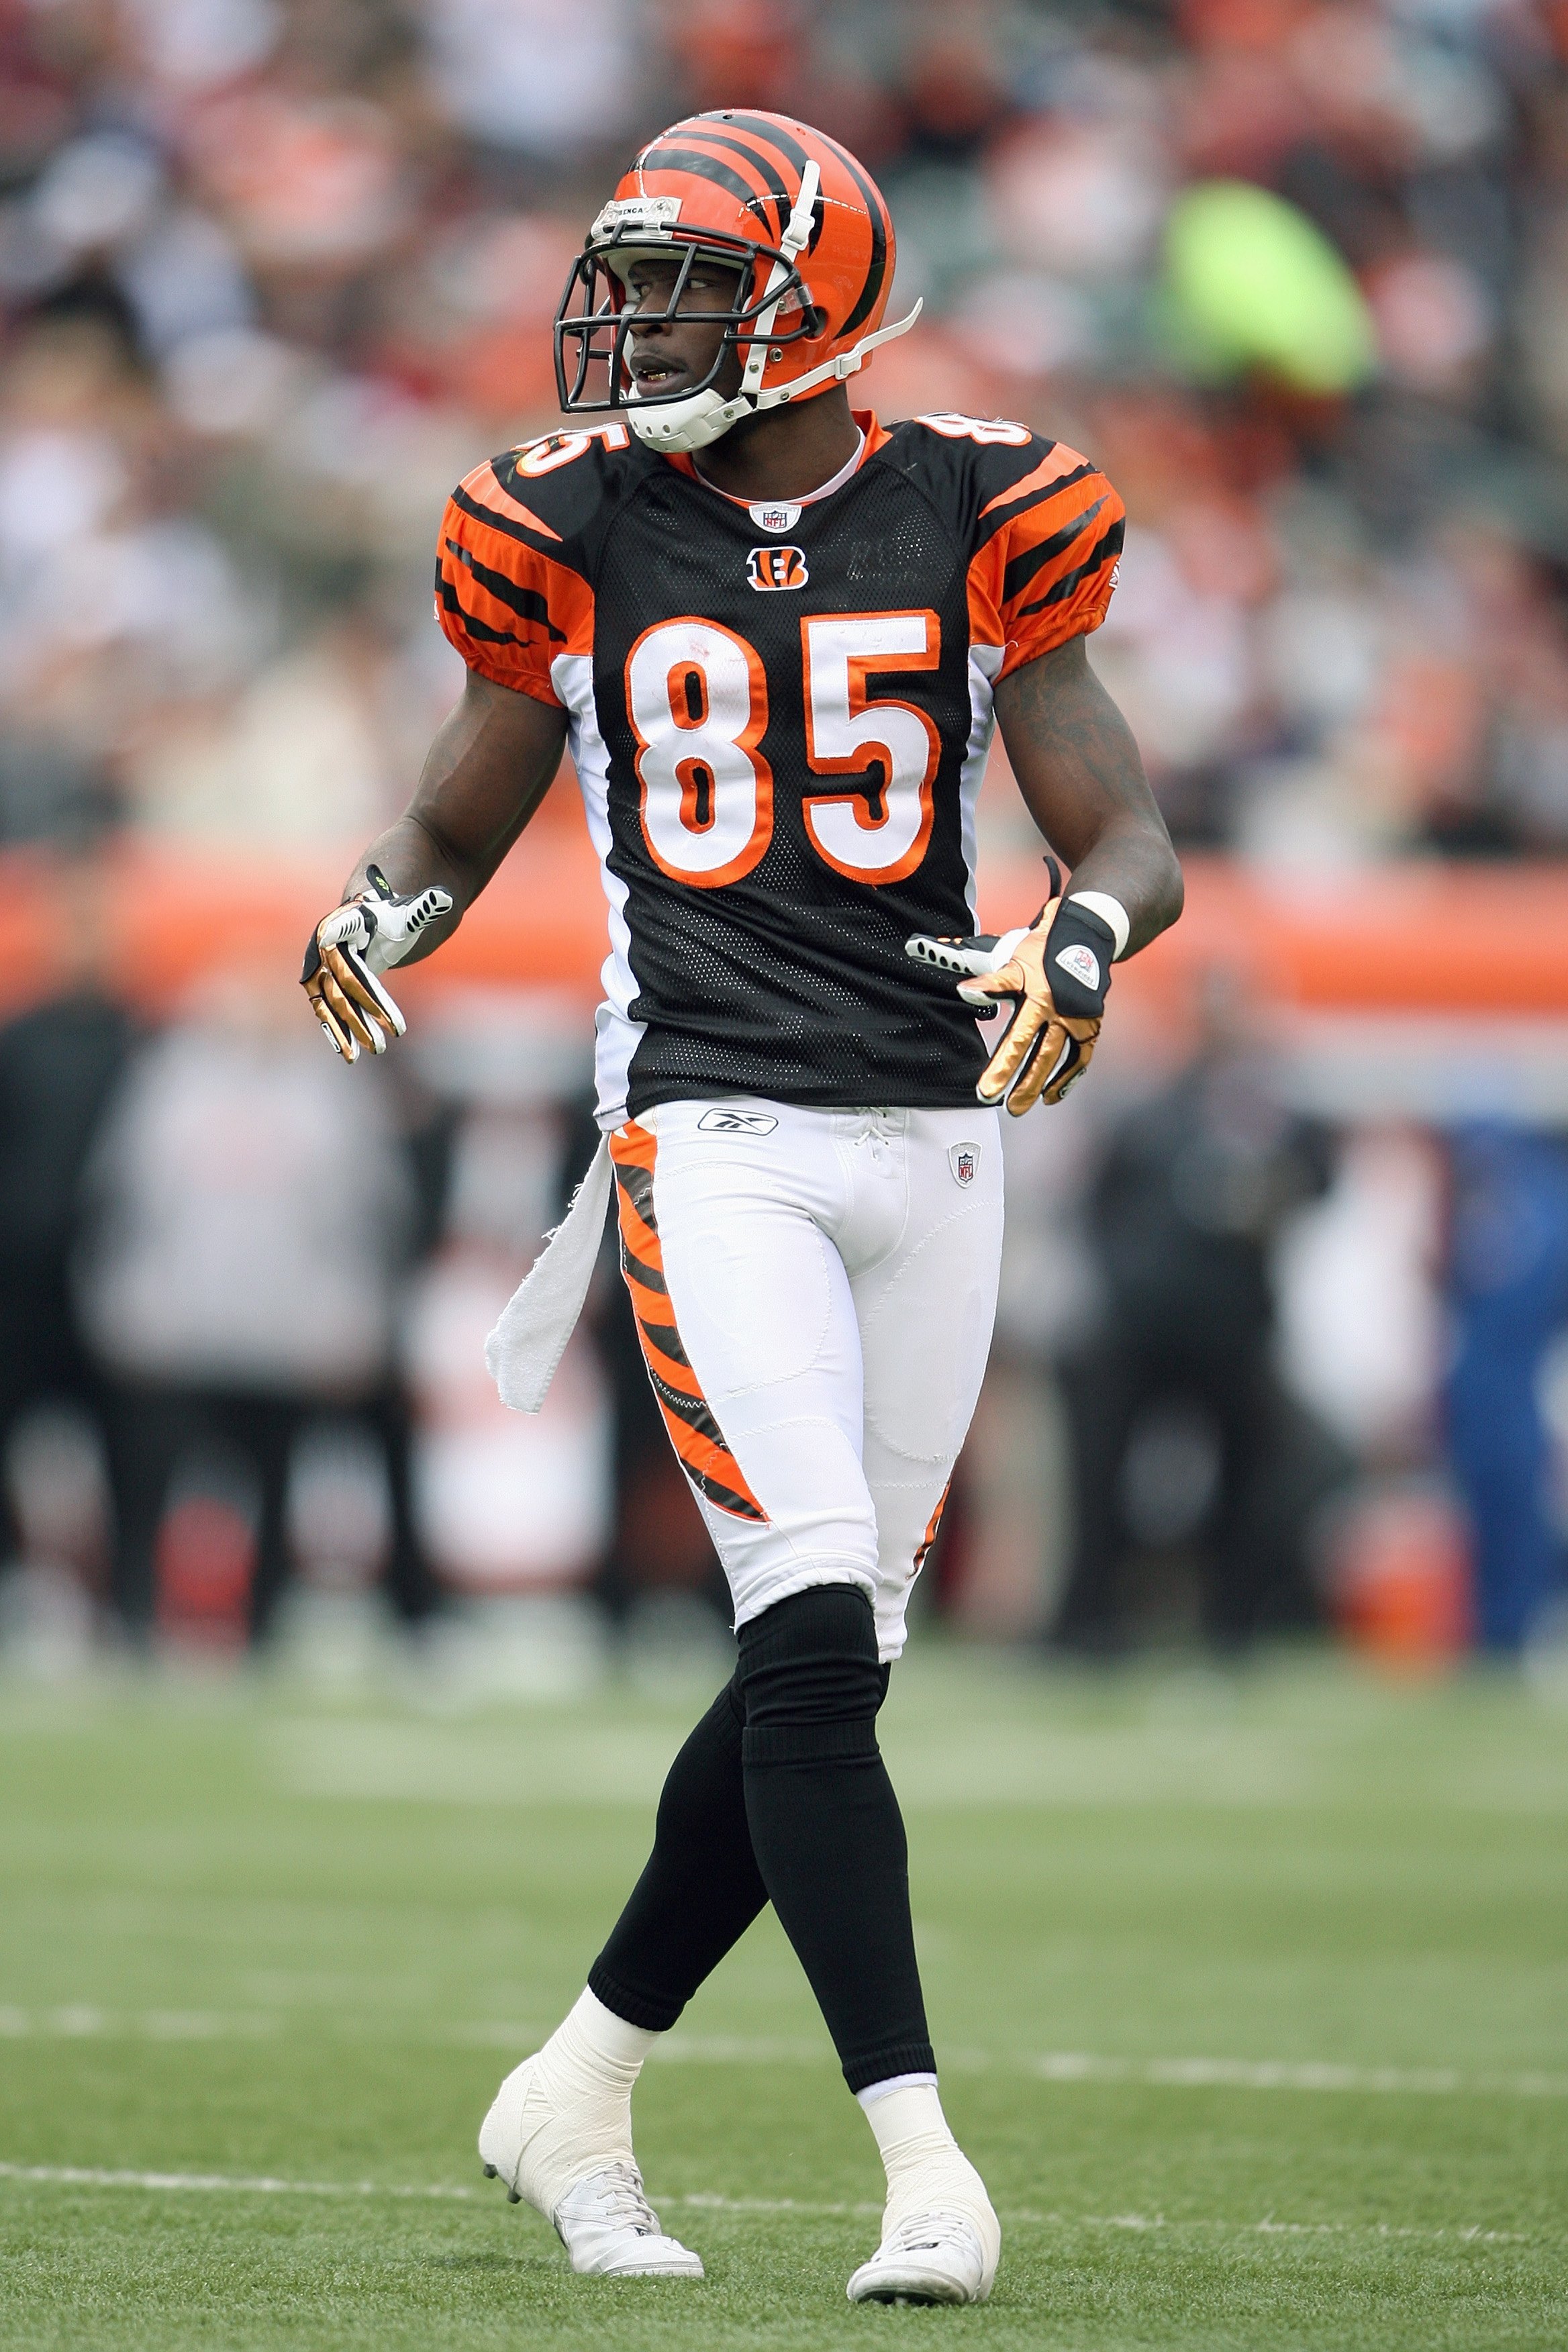 CINCINNATI - DECEMBER 14:  Chad Johnson #85 of the Cincinnati Bengals moves on the field during the NFL game against the Washington Redskins on December 14, 2008 at Paul Brown Stadium in Cincinnati, Ohio. The Bengals won 20-13. (Photo by Andy Lyons/Getty